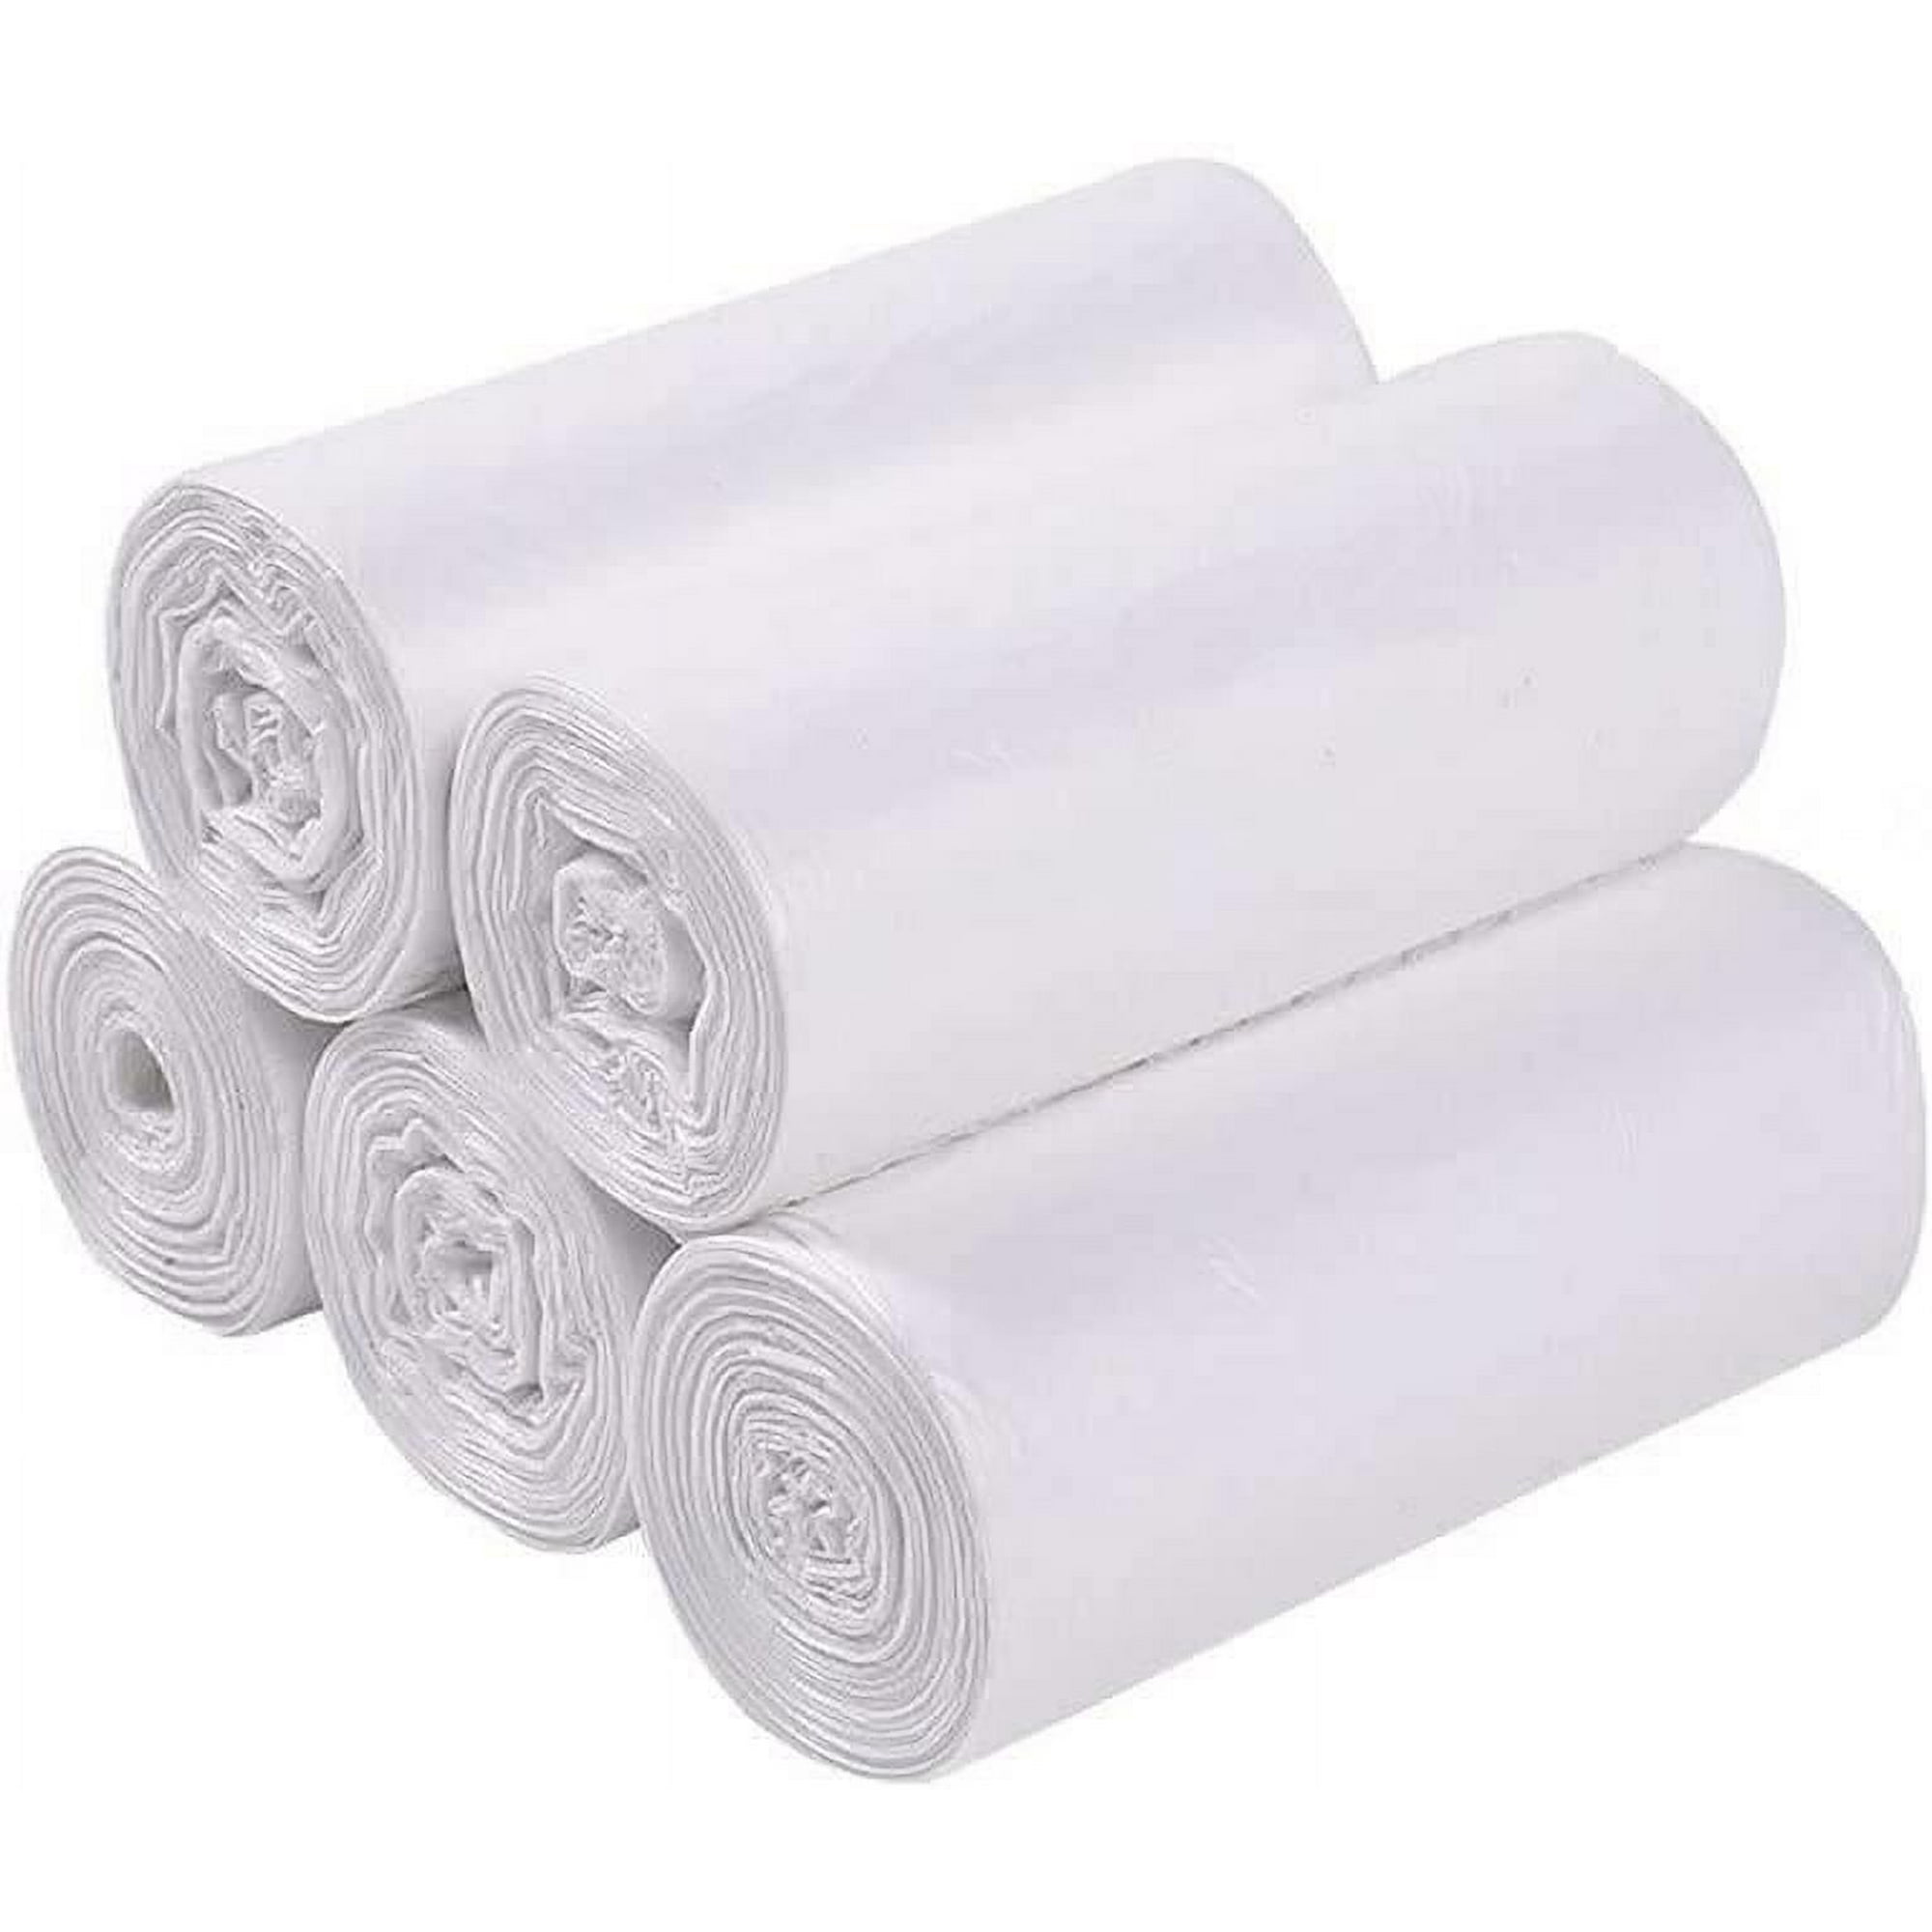 5 Rolls Small Trash Bags - 100 Counts Durable 4 Gallon Small Garbage Bags  for home office kitchen Ba…See more 5 Rolls Small Trash Bags - 100 Counts